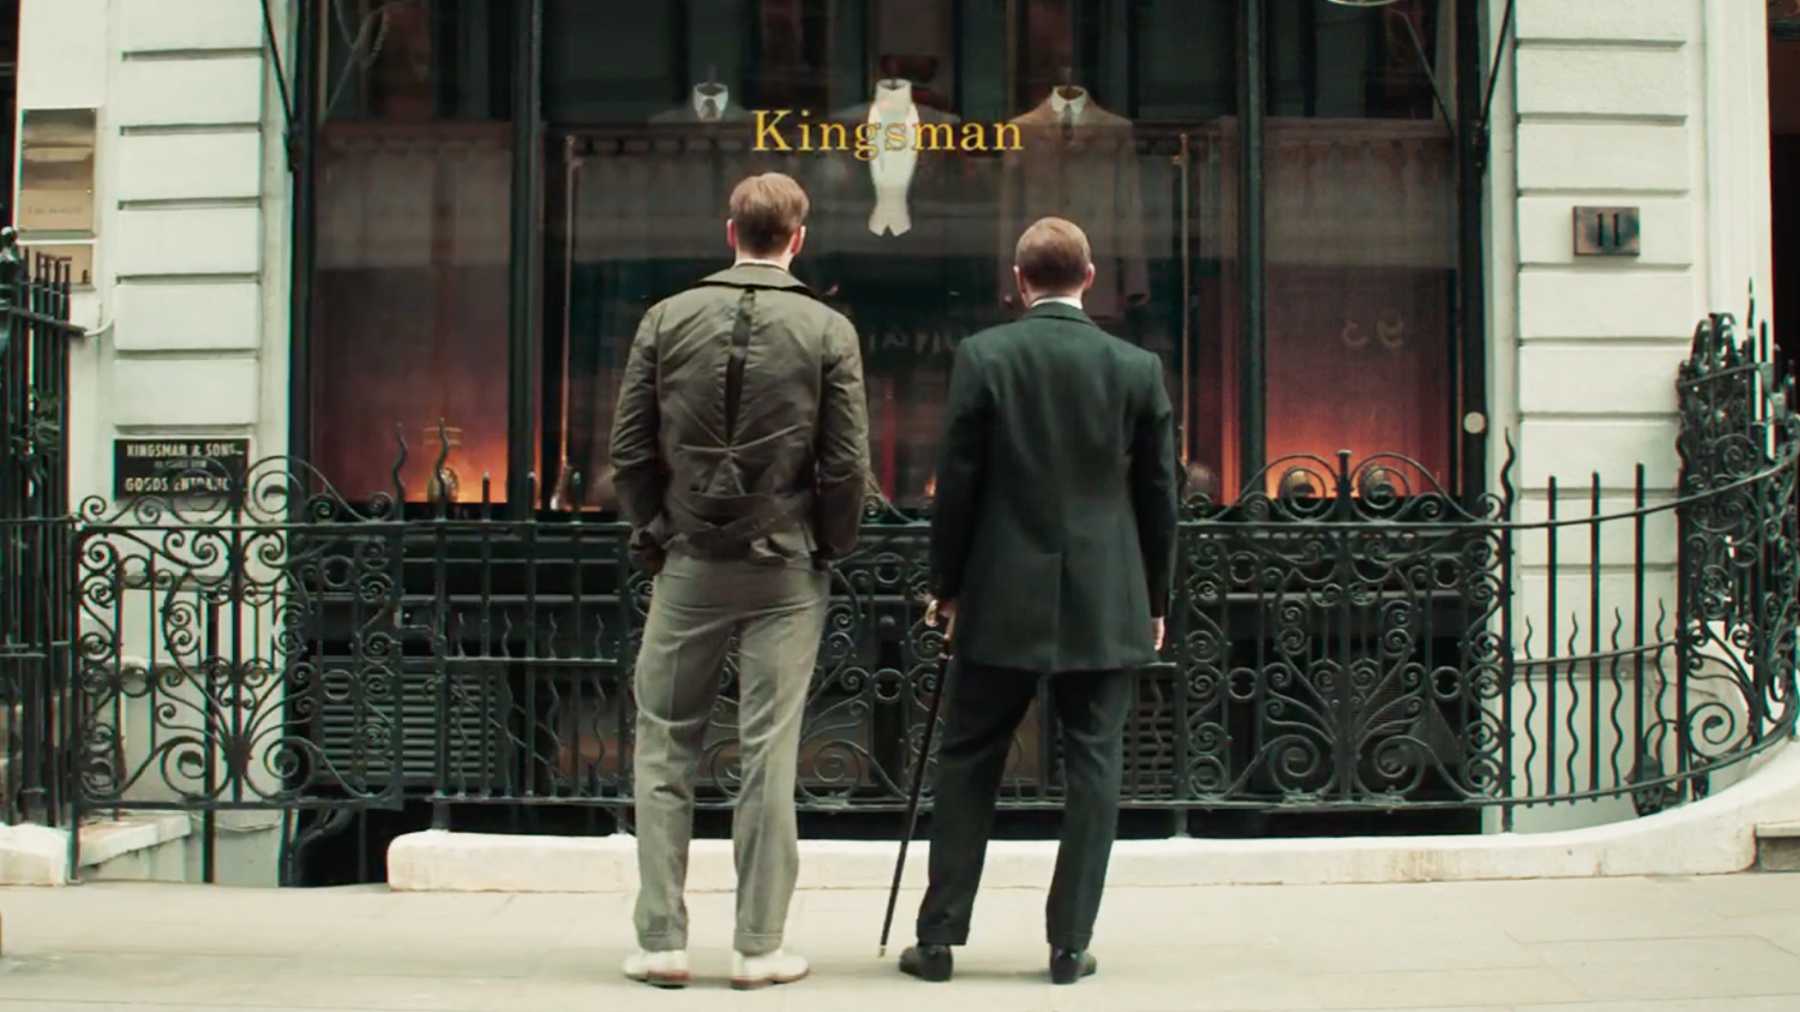 The King’s Man: Everything You Need to Know About the Upcoming Film | NYCC 2019